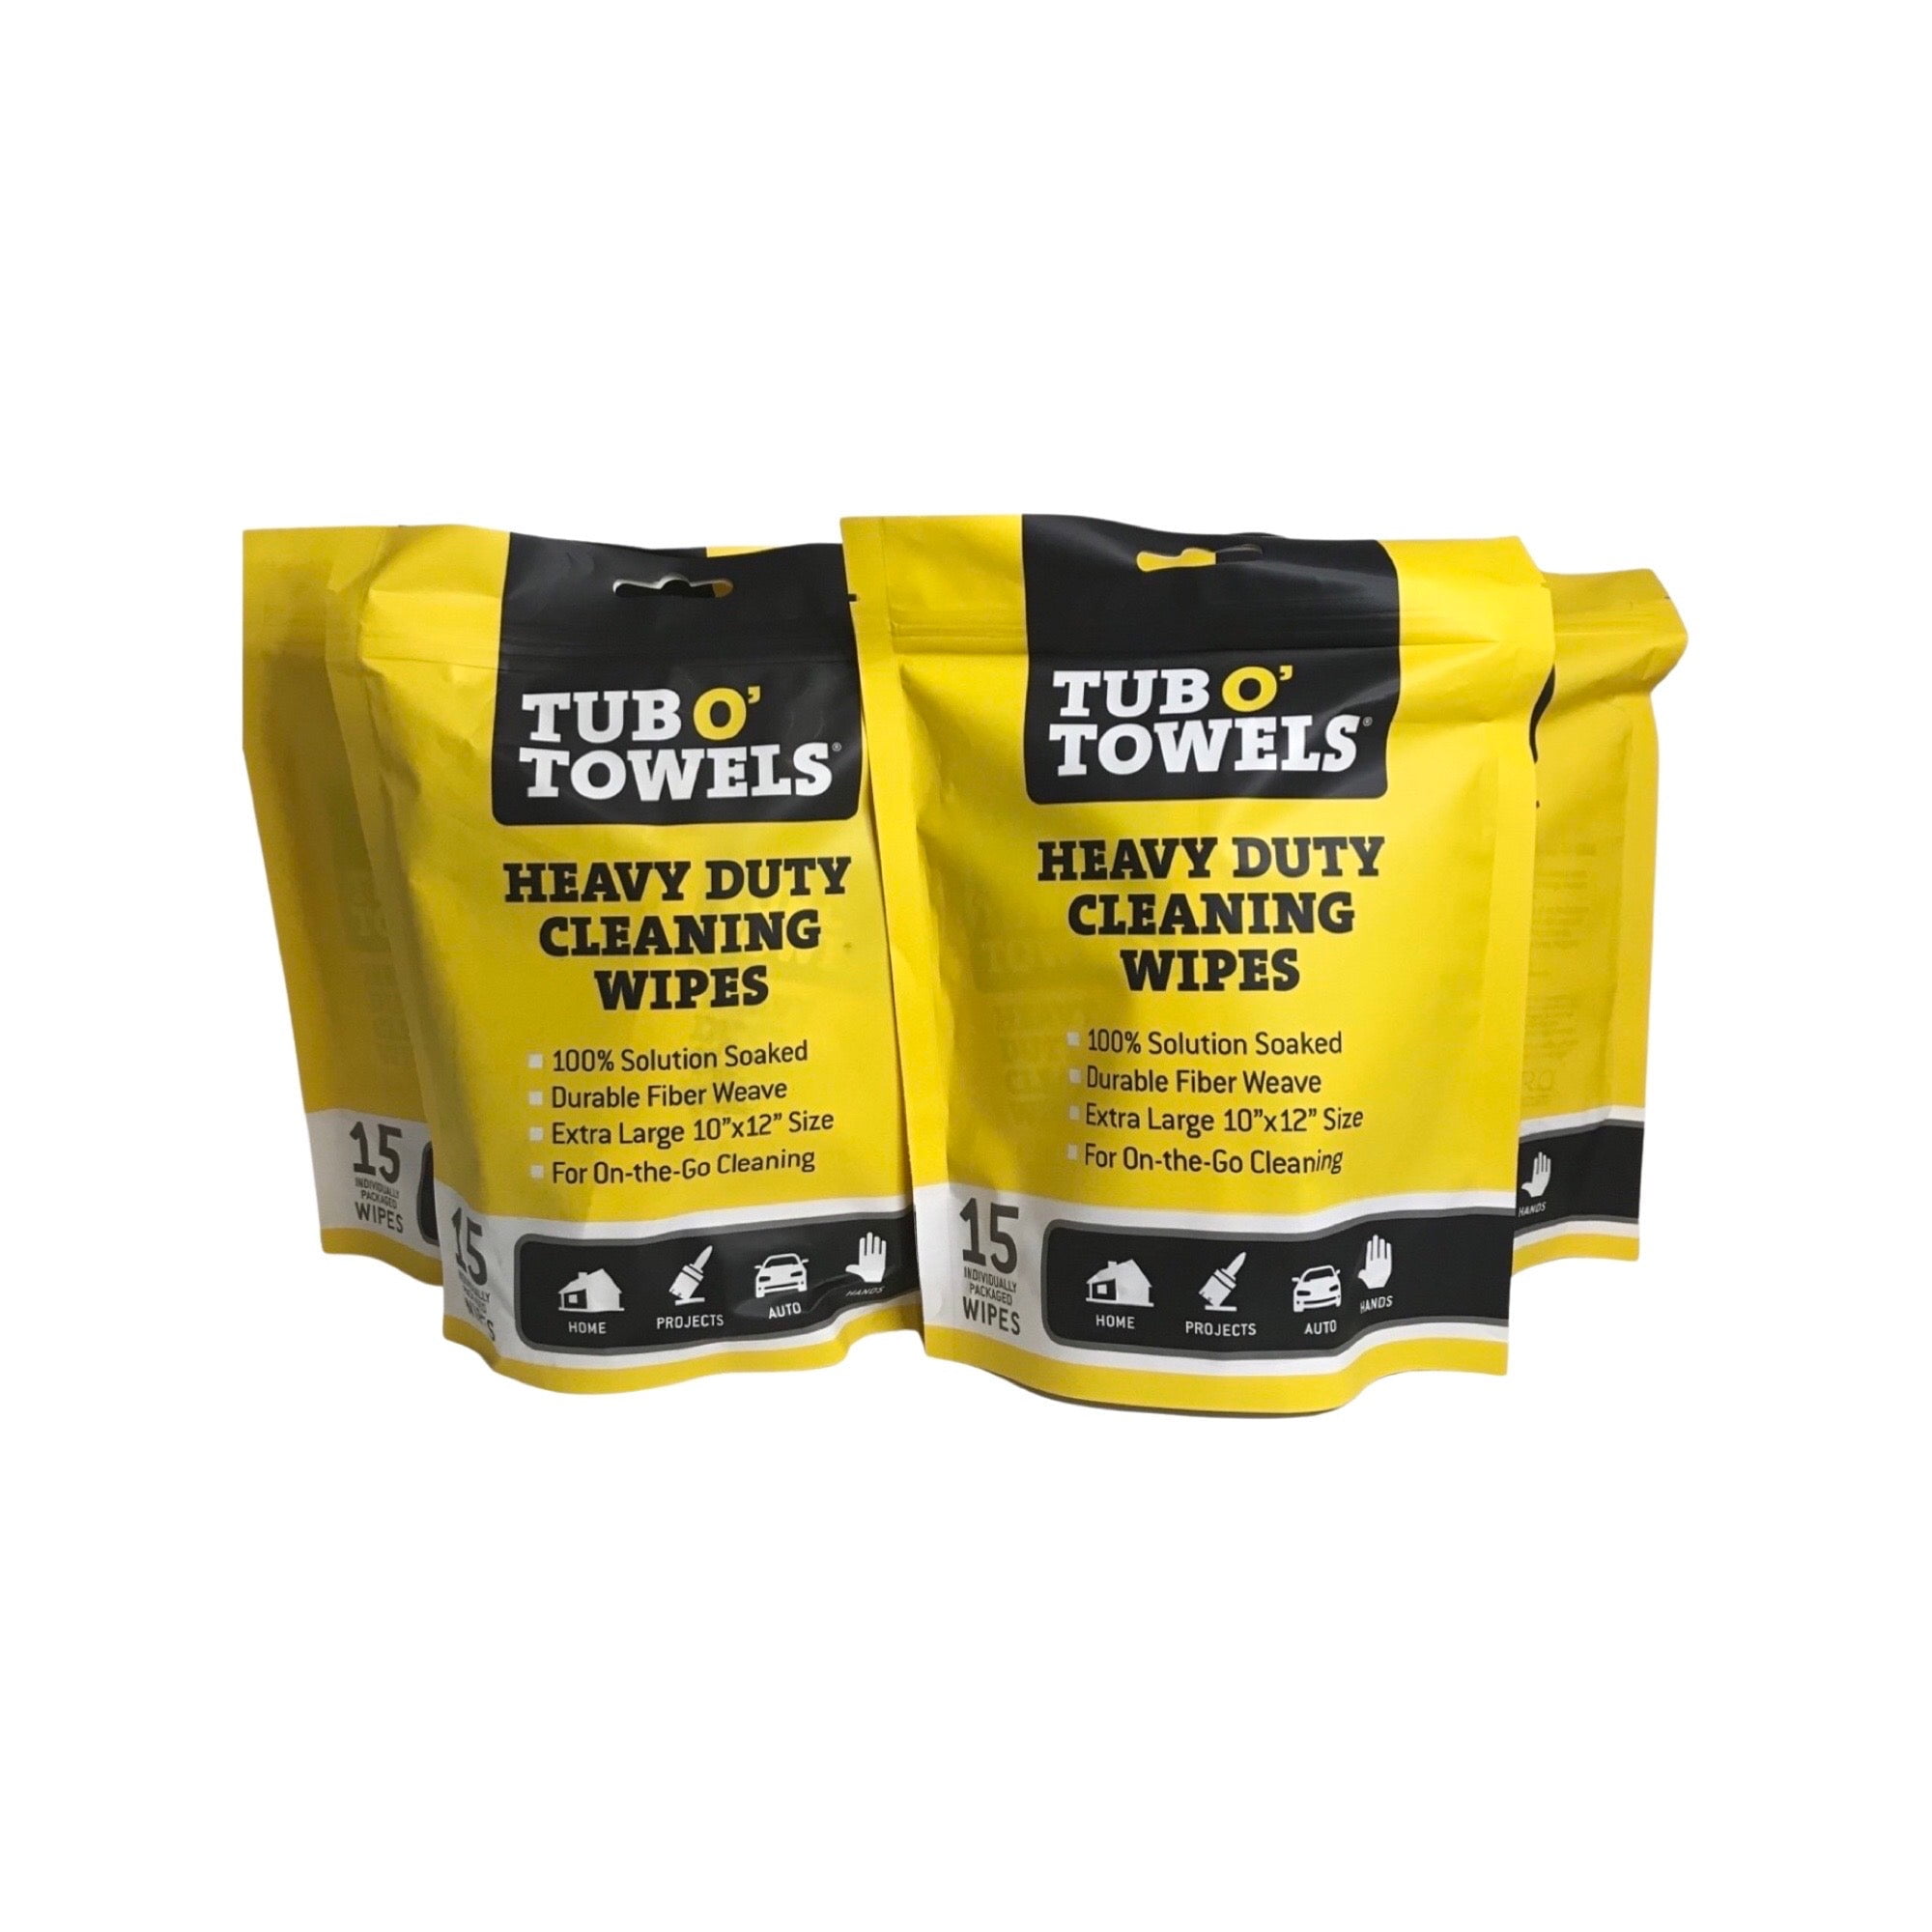 TW90 Tub O' Towels TW90 Heavy-Duty 10 x 12 Size Multi-Surface Cleaning  Wipes, 90 Count Per Canister, Shop Supplies, Cleaning, Hand Cleaners